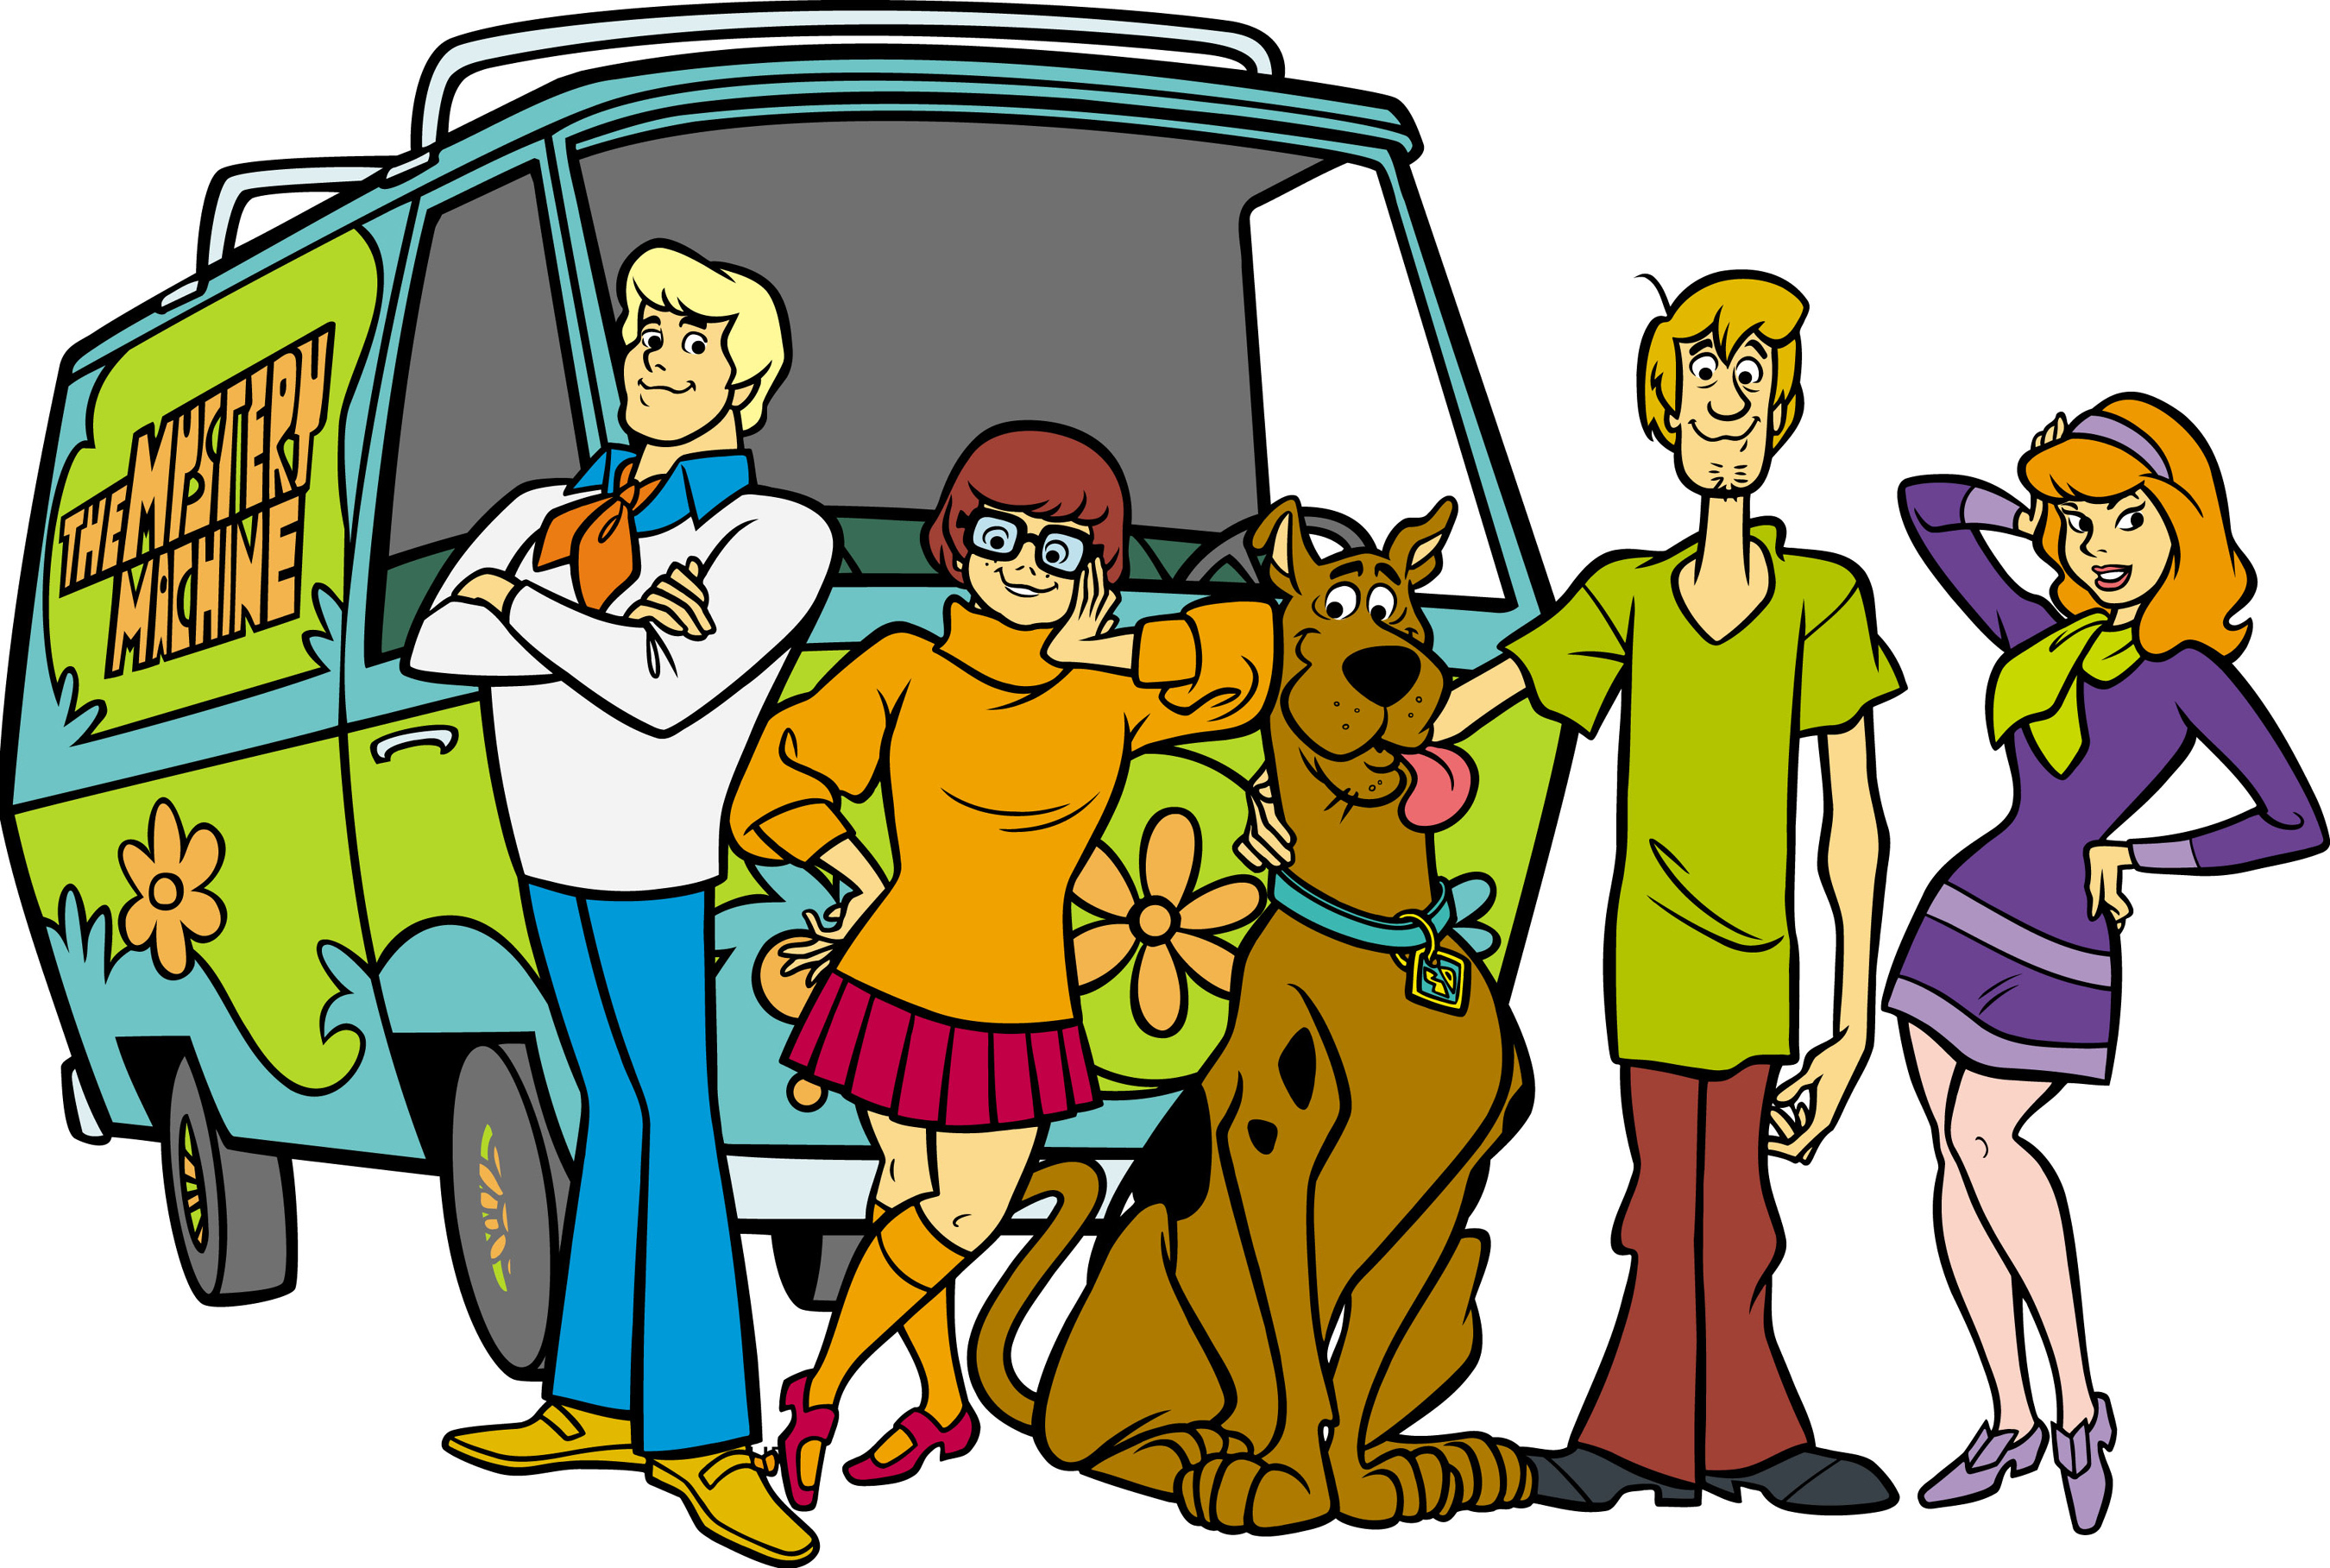 Fred, Velma, Scooby-Doo, Shaggy, and Daphne stand by the Mystery Machine